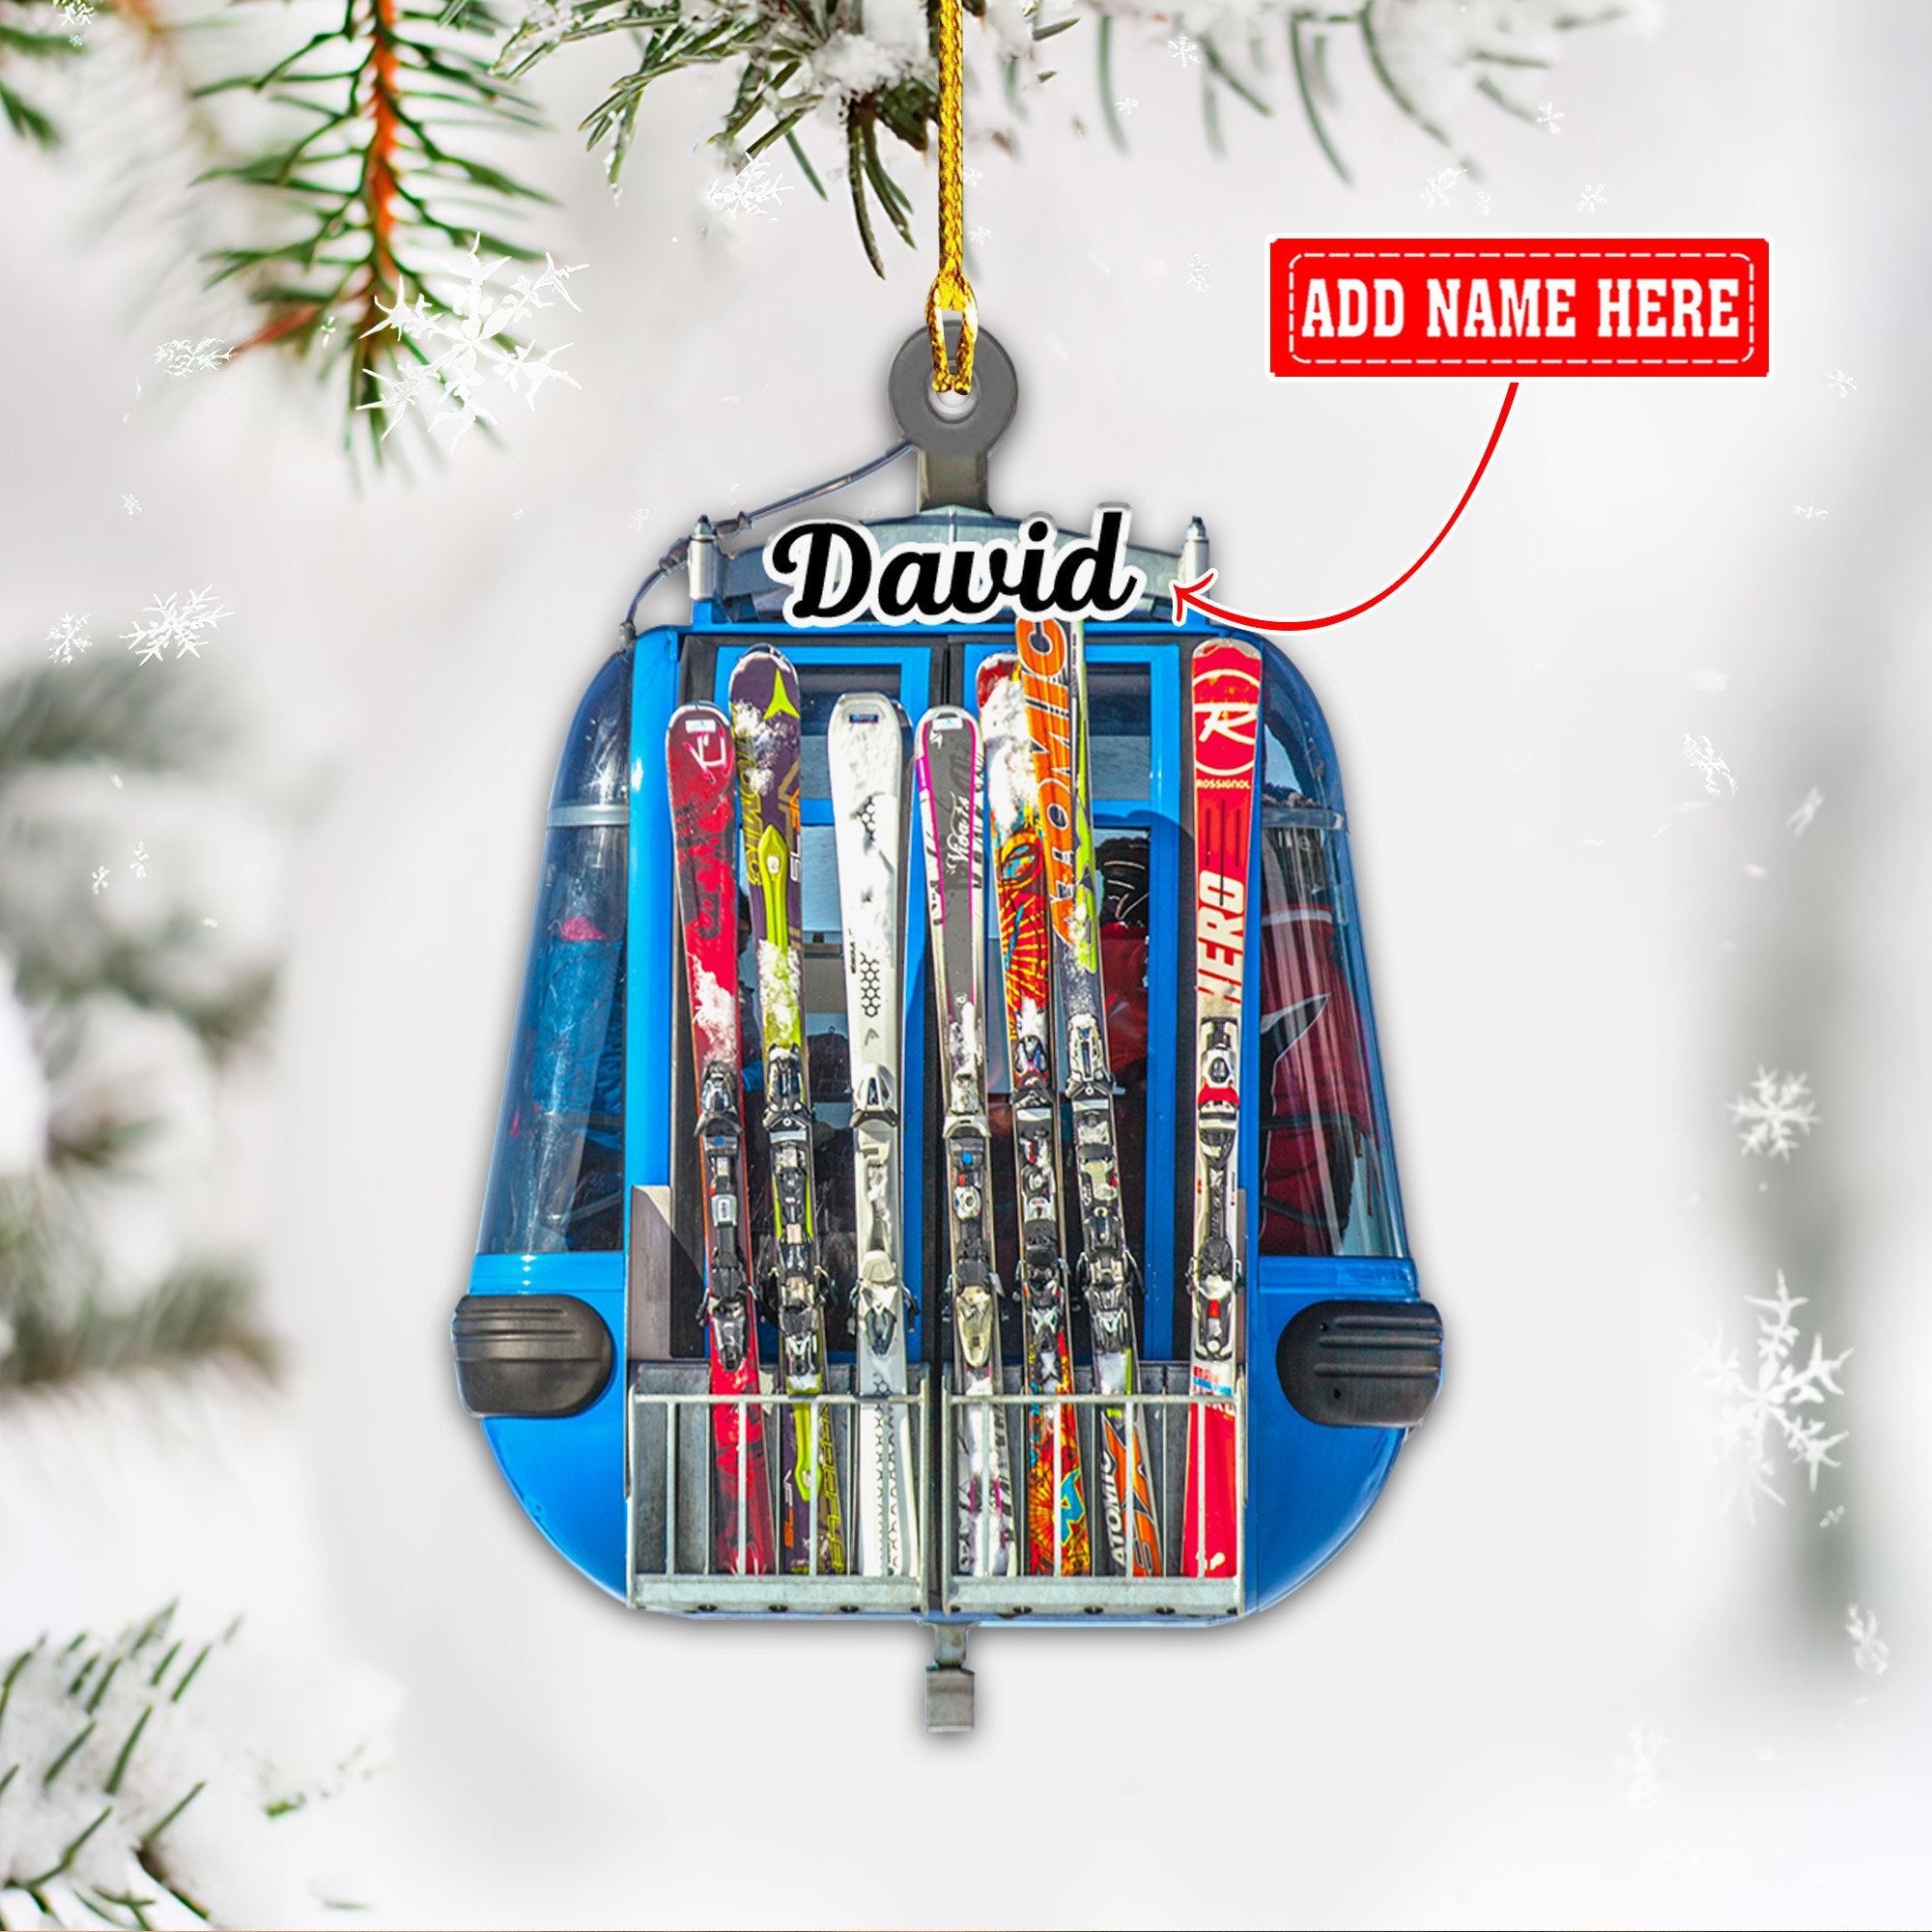 Personalized Skiing Sky Lift Christmas Acrylic Ornaments/ Gift for Snowboarding Lover